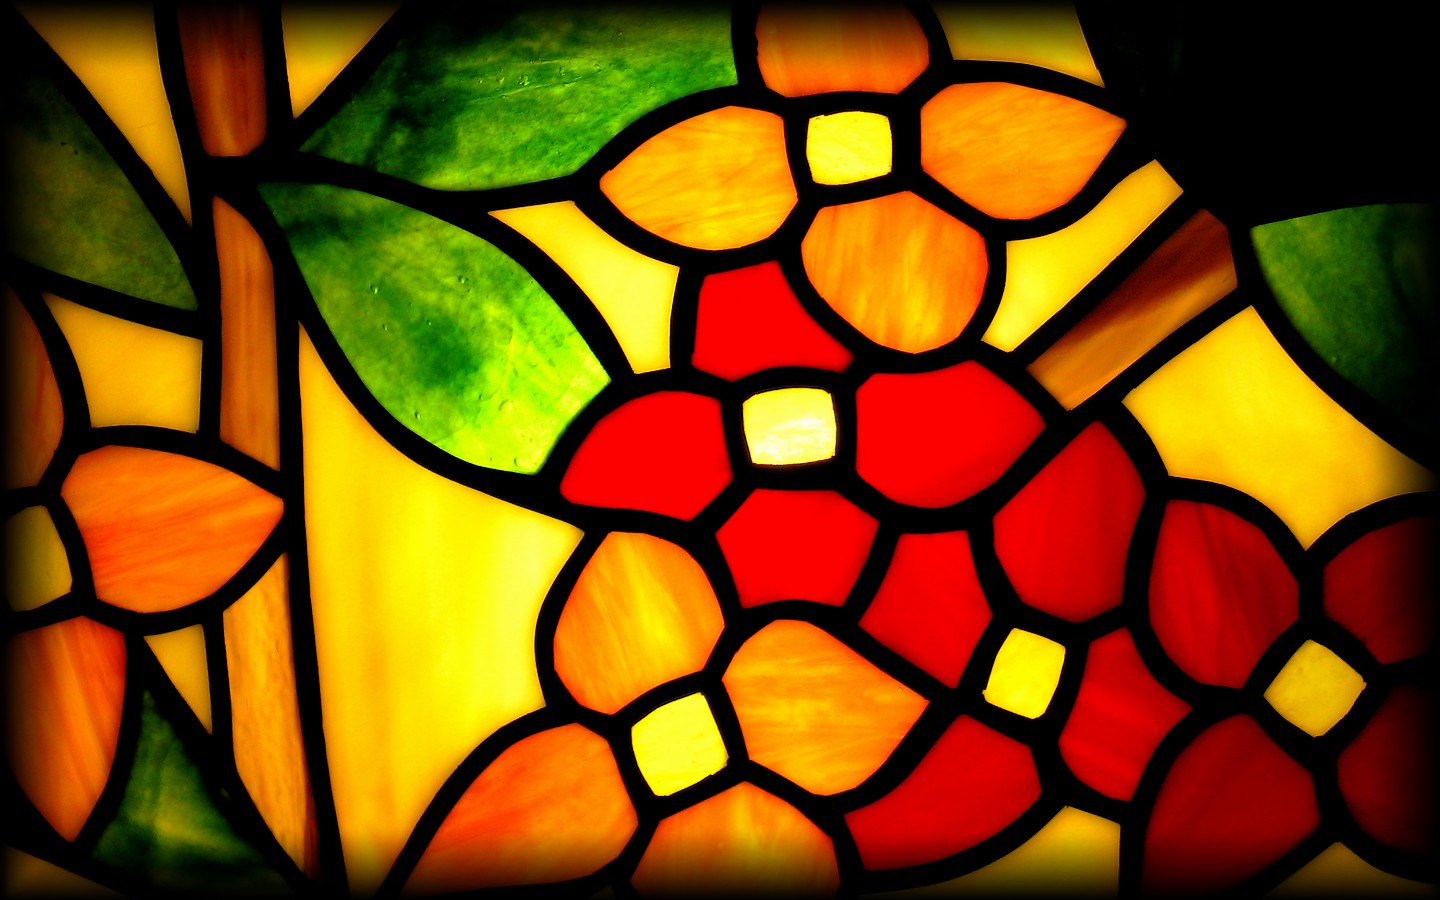 stained glass wallpaper,stained glass,lighting,glass,psychedelic art,window